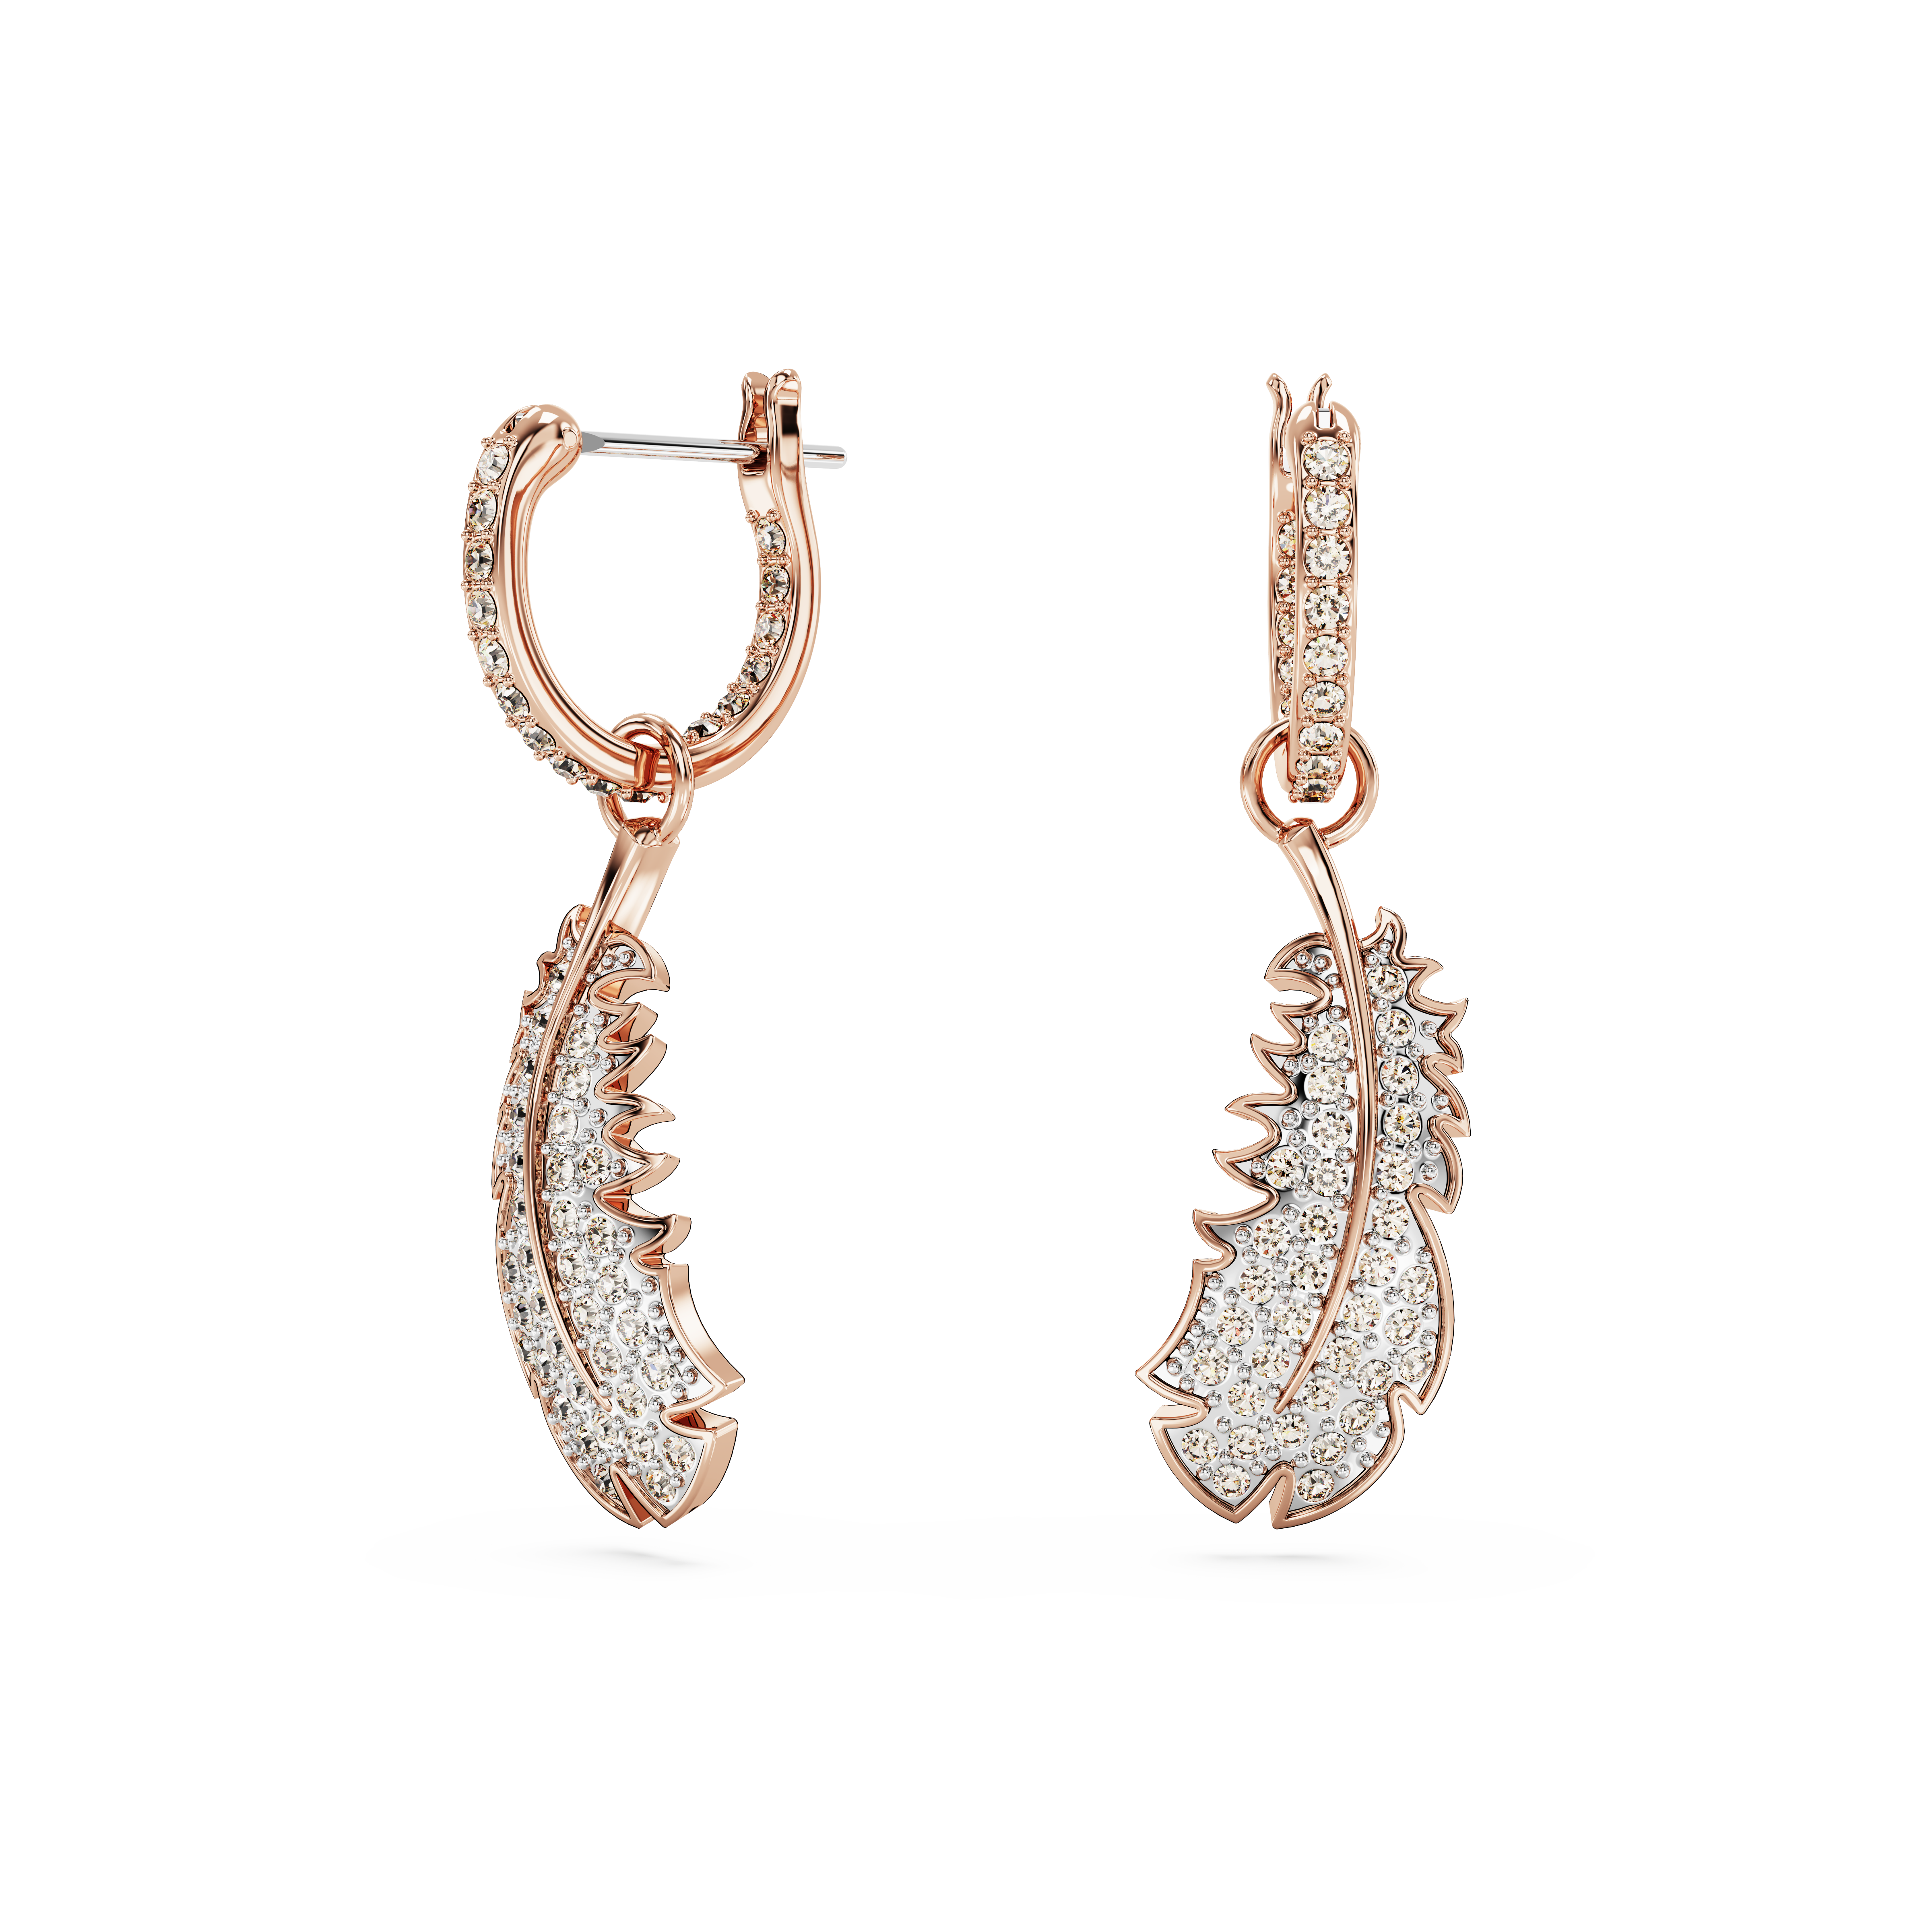 SWAROVSKI NICE DROP EARRINGS, FEATHER, WHITE, ROSE GOLD-TONE PLATED 5663486